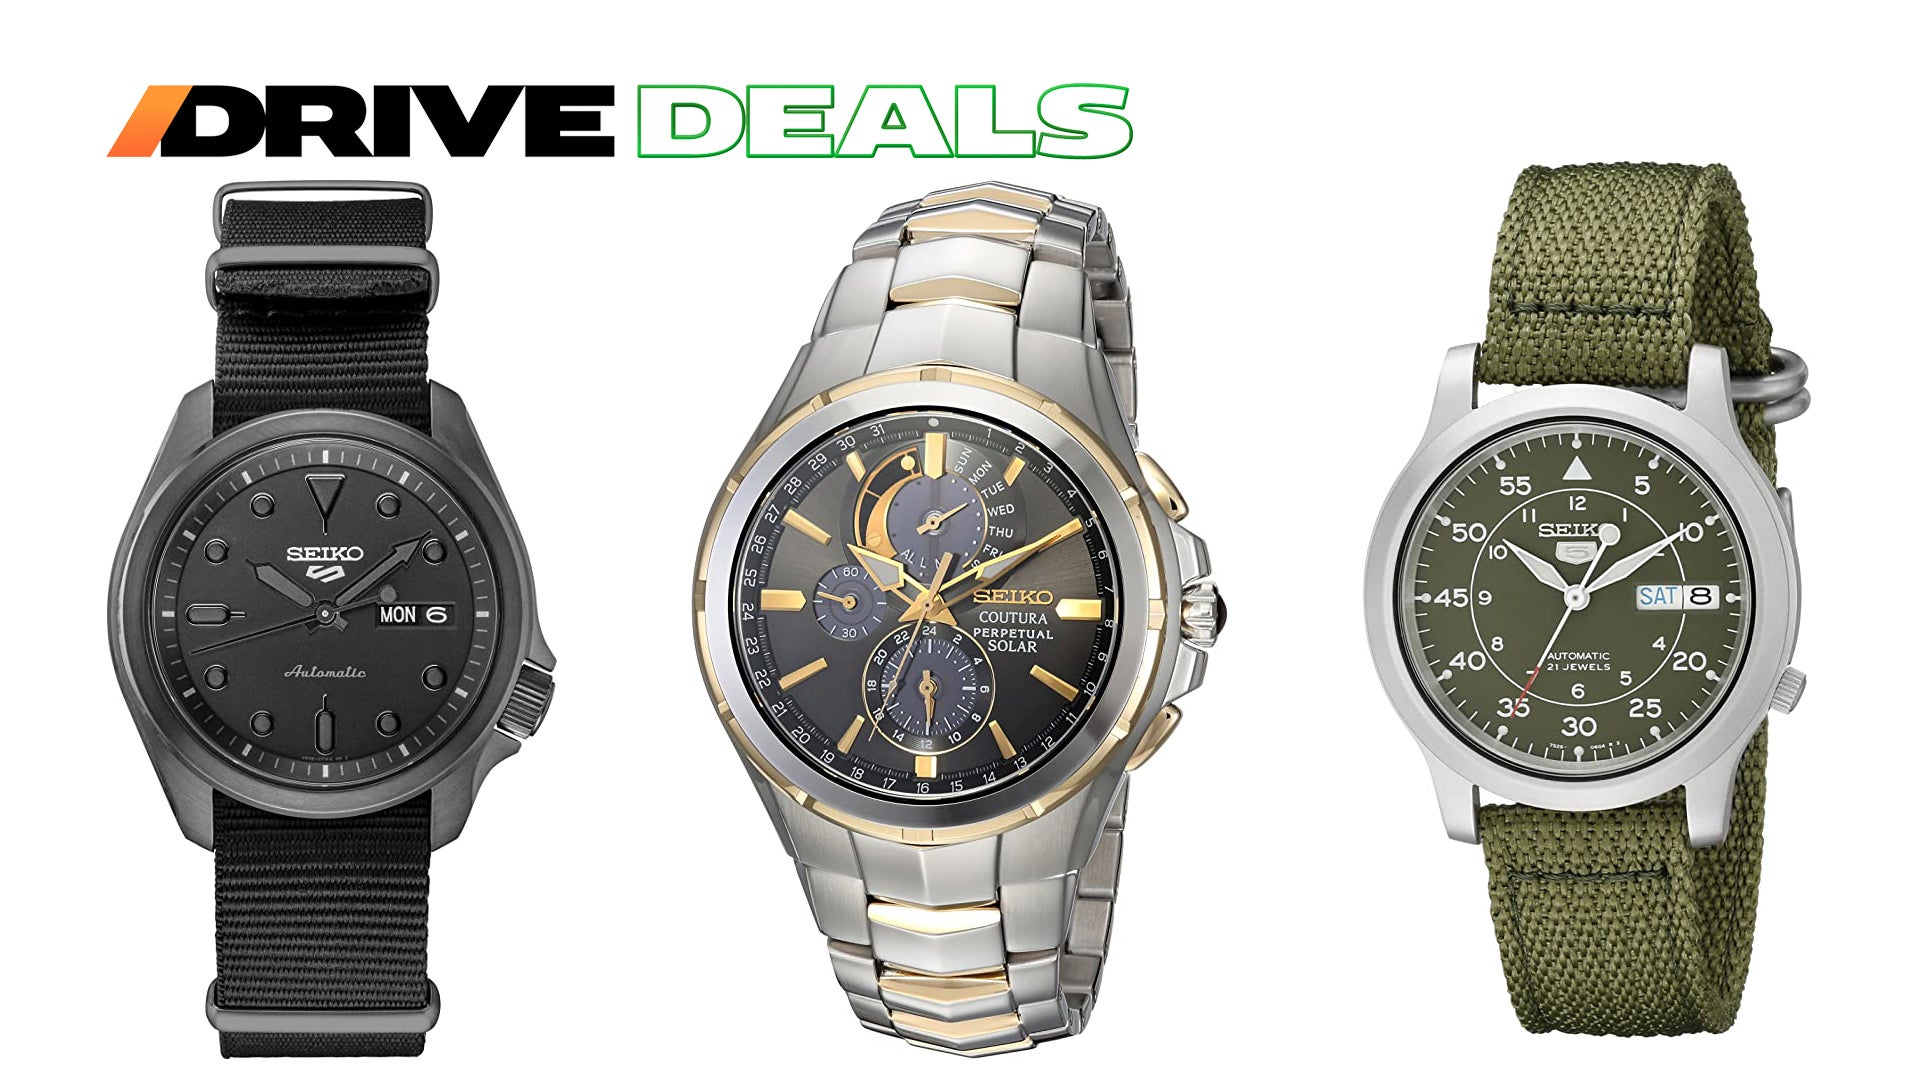 Check Out Amazon’s Hot Seiko Watch Deals